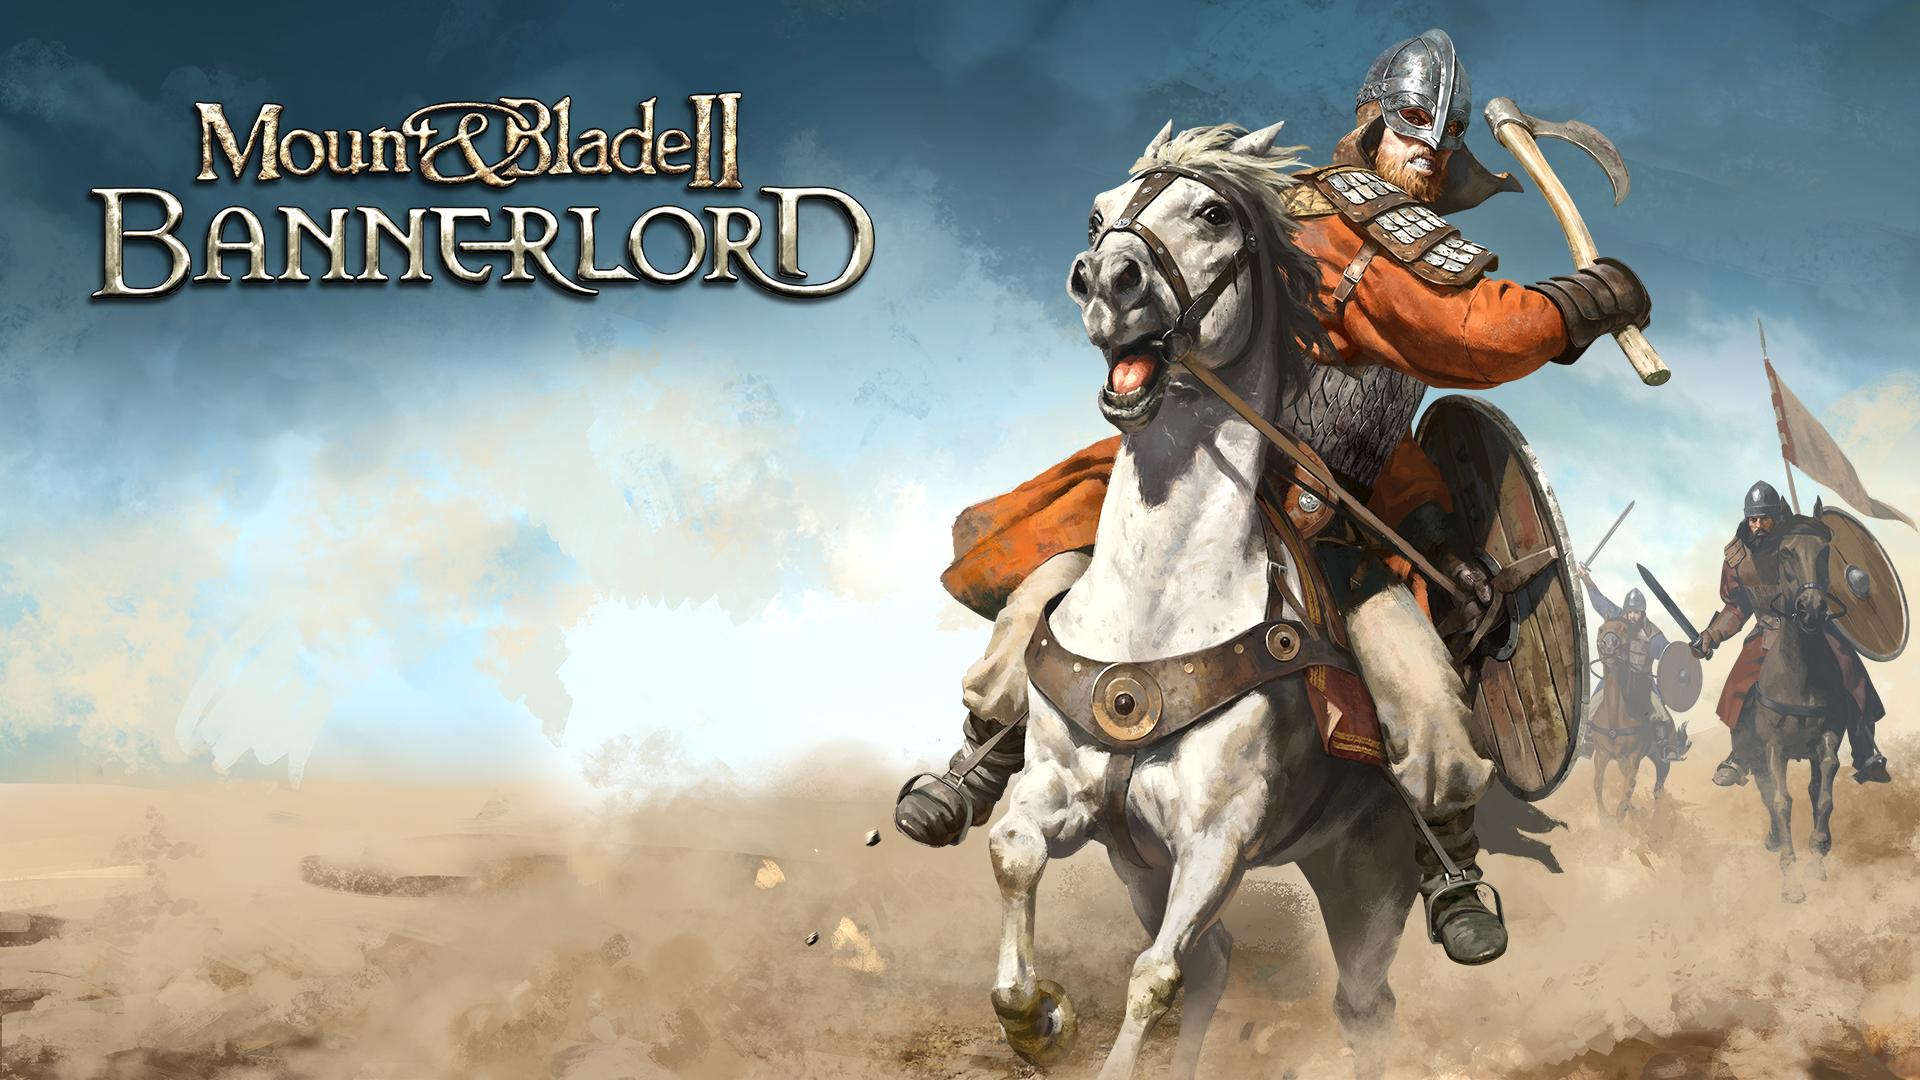 Mount & Blade II: Bannerlord has a new Early Access date - March 30th